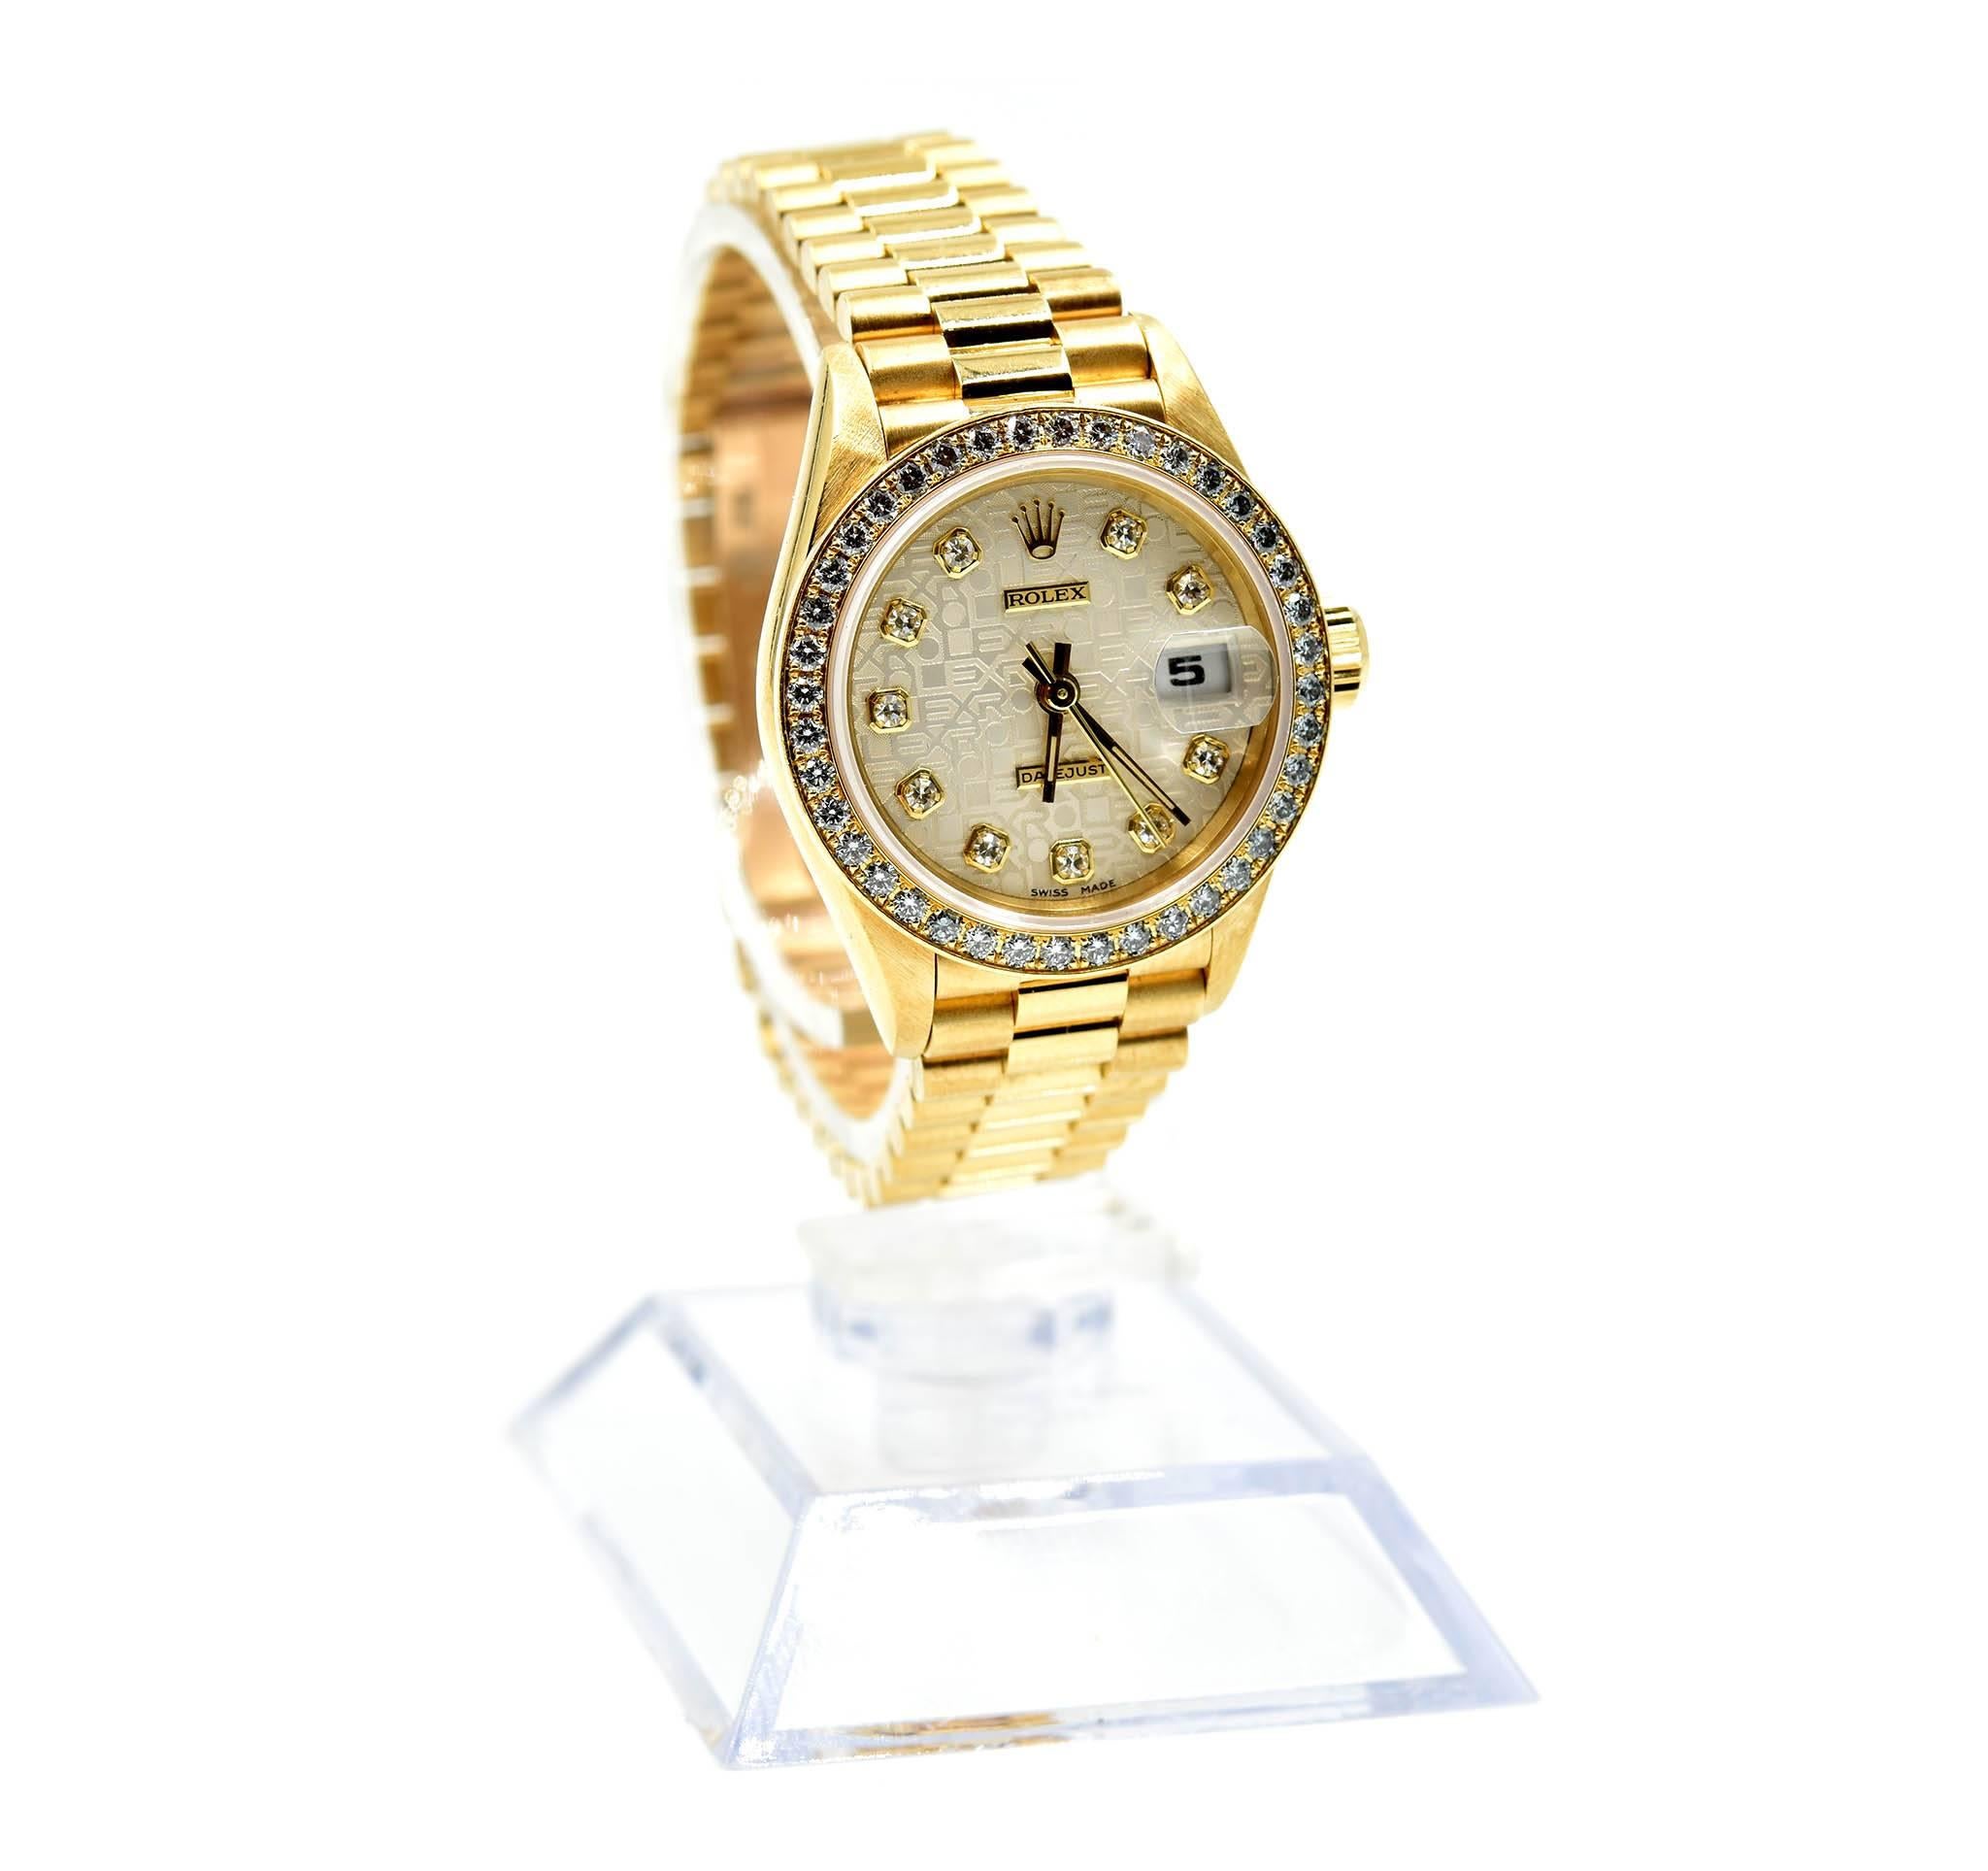 Movement: automatic
Function: hours, minutes, sweep seconds, date
Case: round 26mm 18k yellow gold case with factory diamond bezel, sapphire protective crystal, screw-down crown, water resistant to 30 meters 
Band: 18k yellow gold presidential